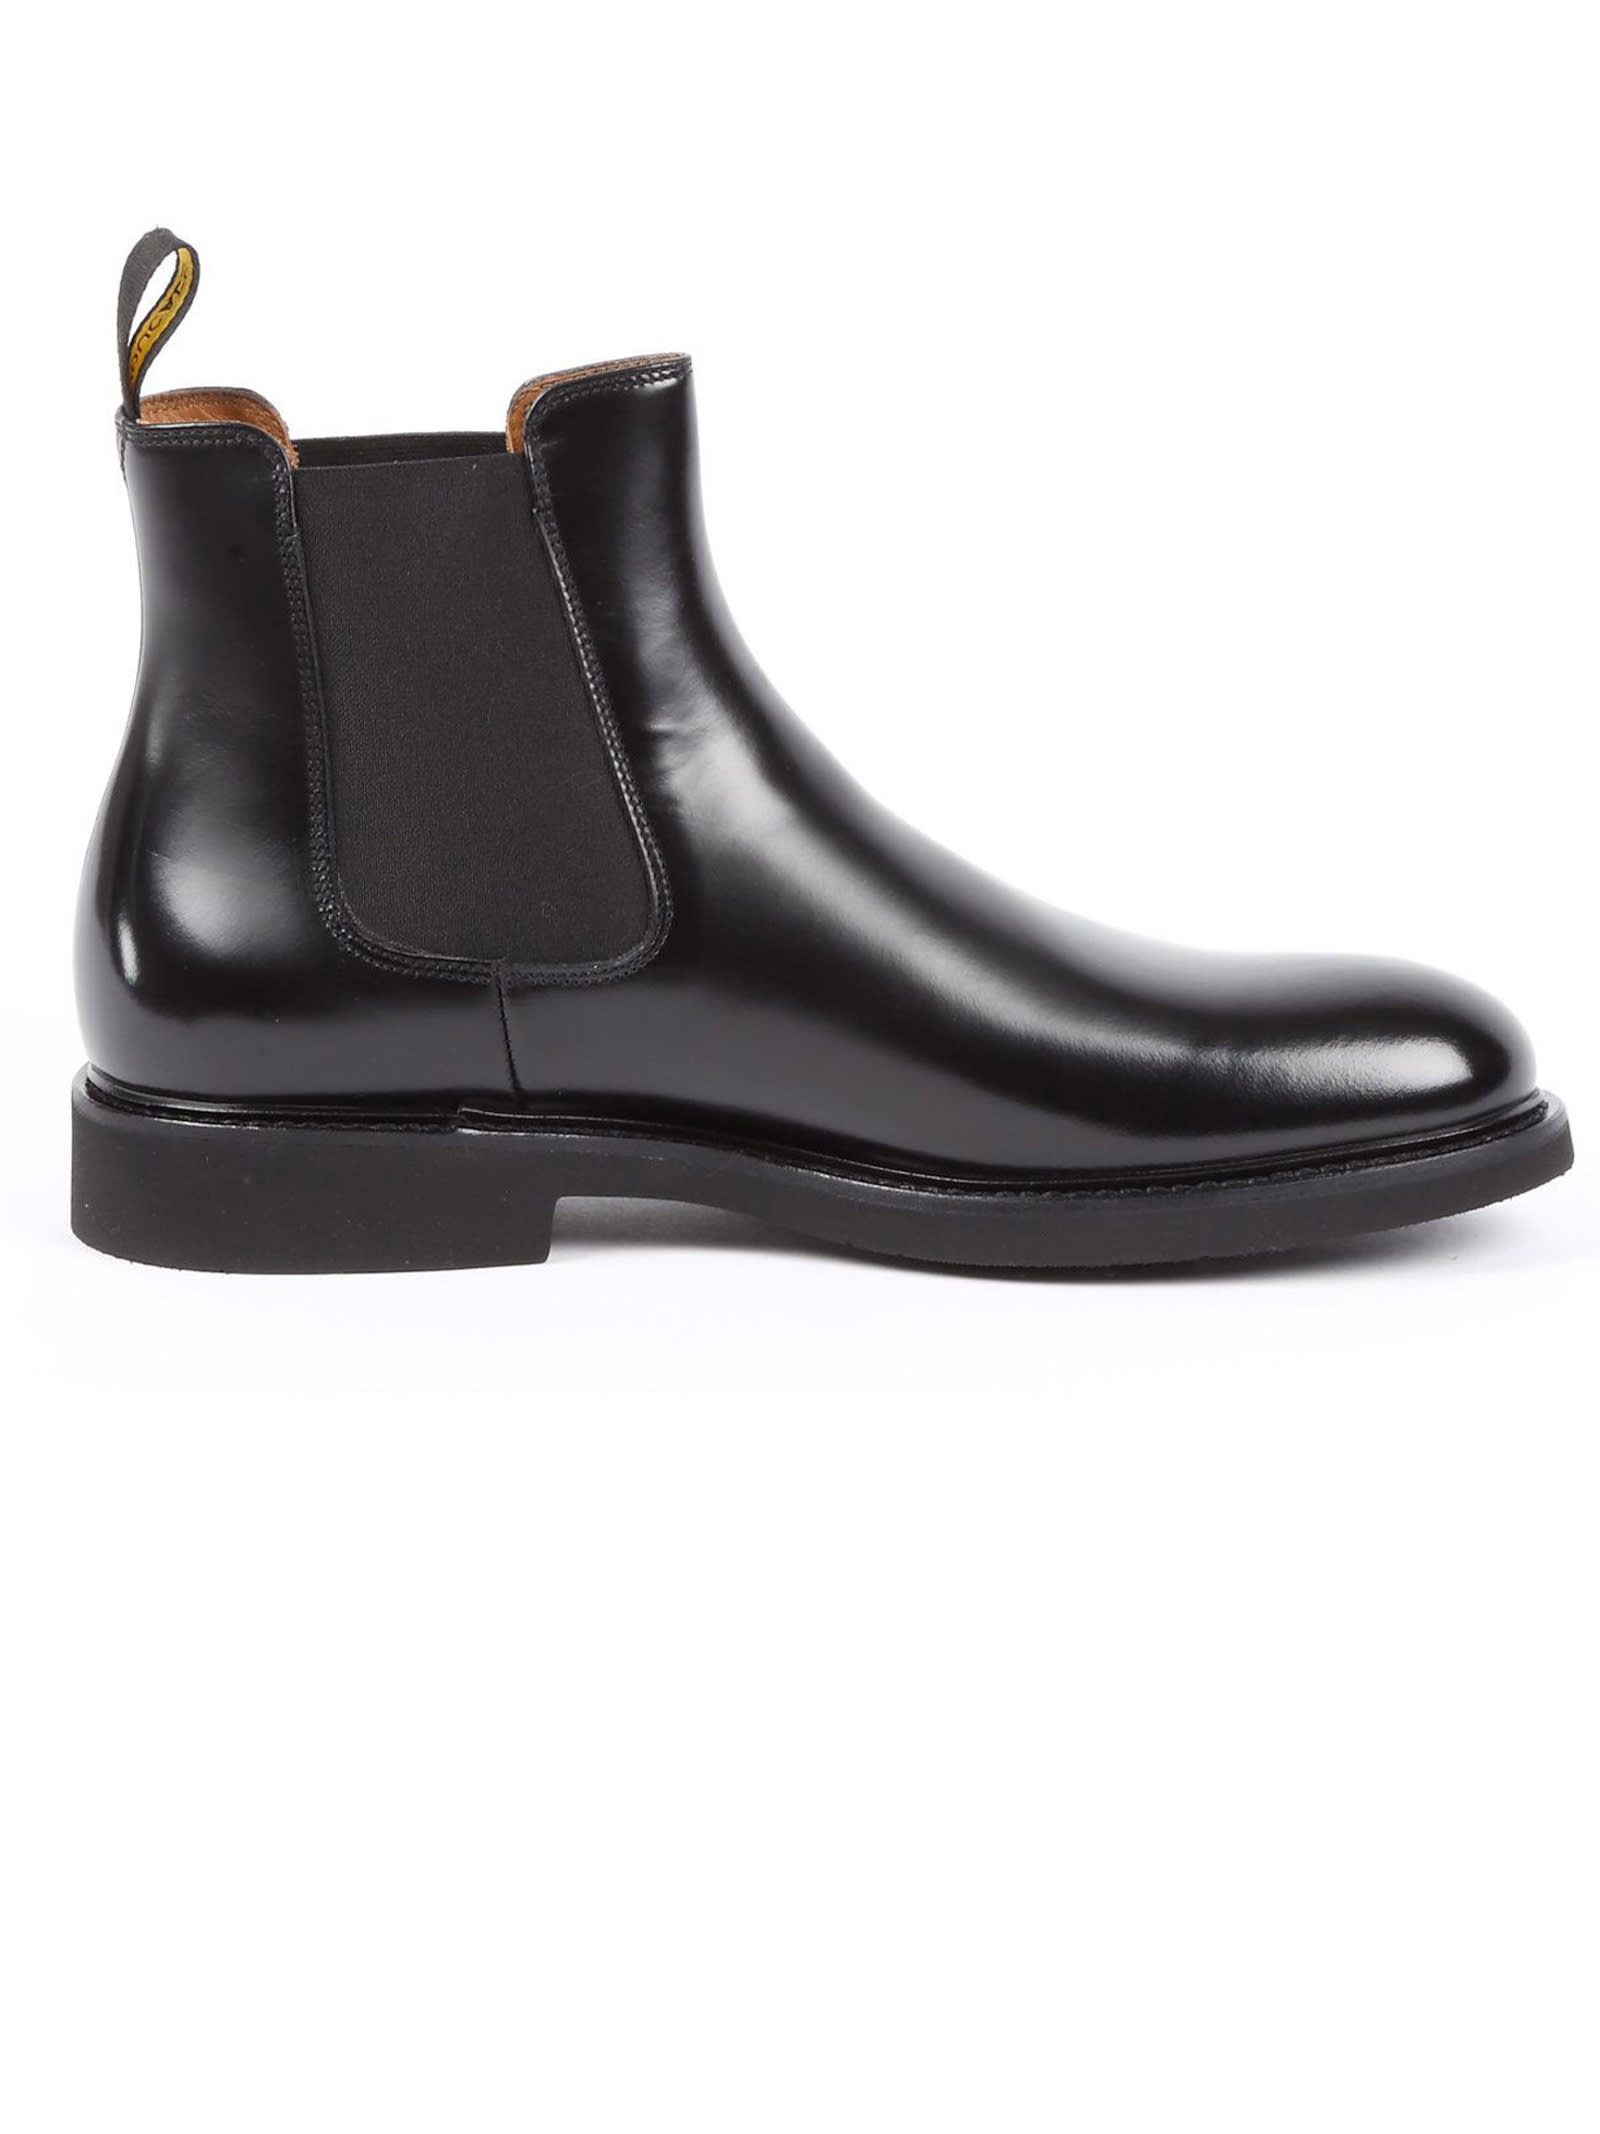 Doucal's Black Brushed Leather Chelsea Boot